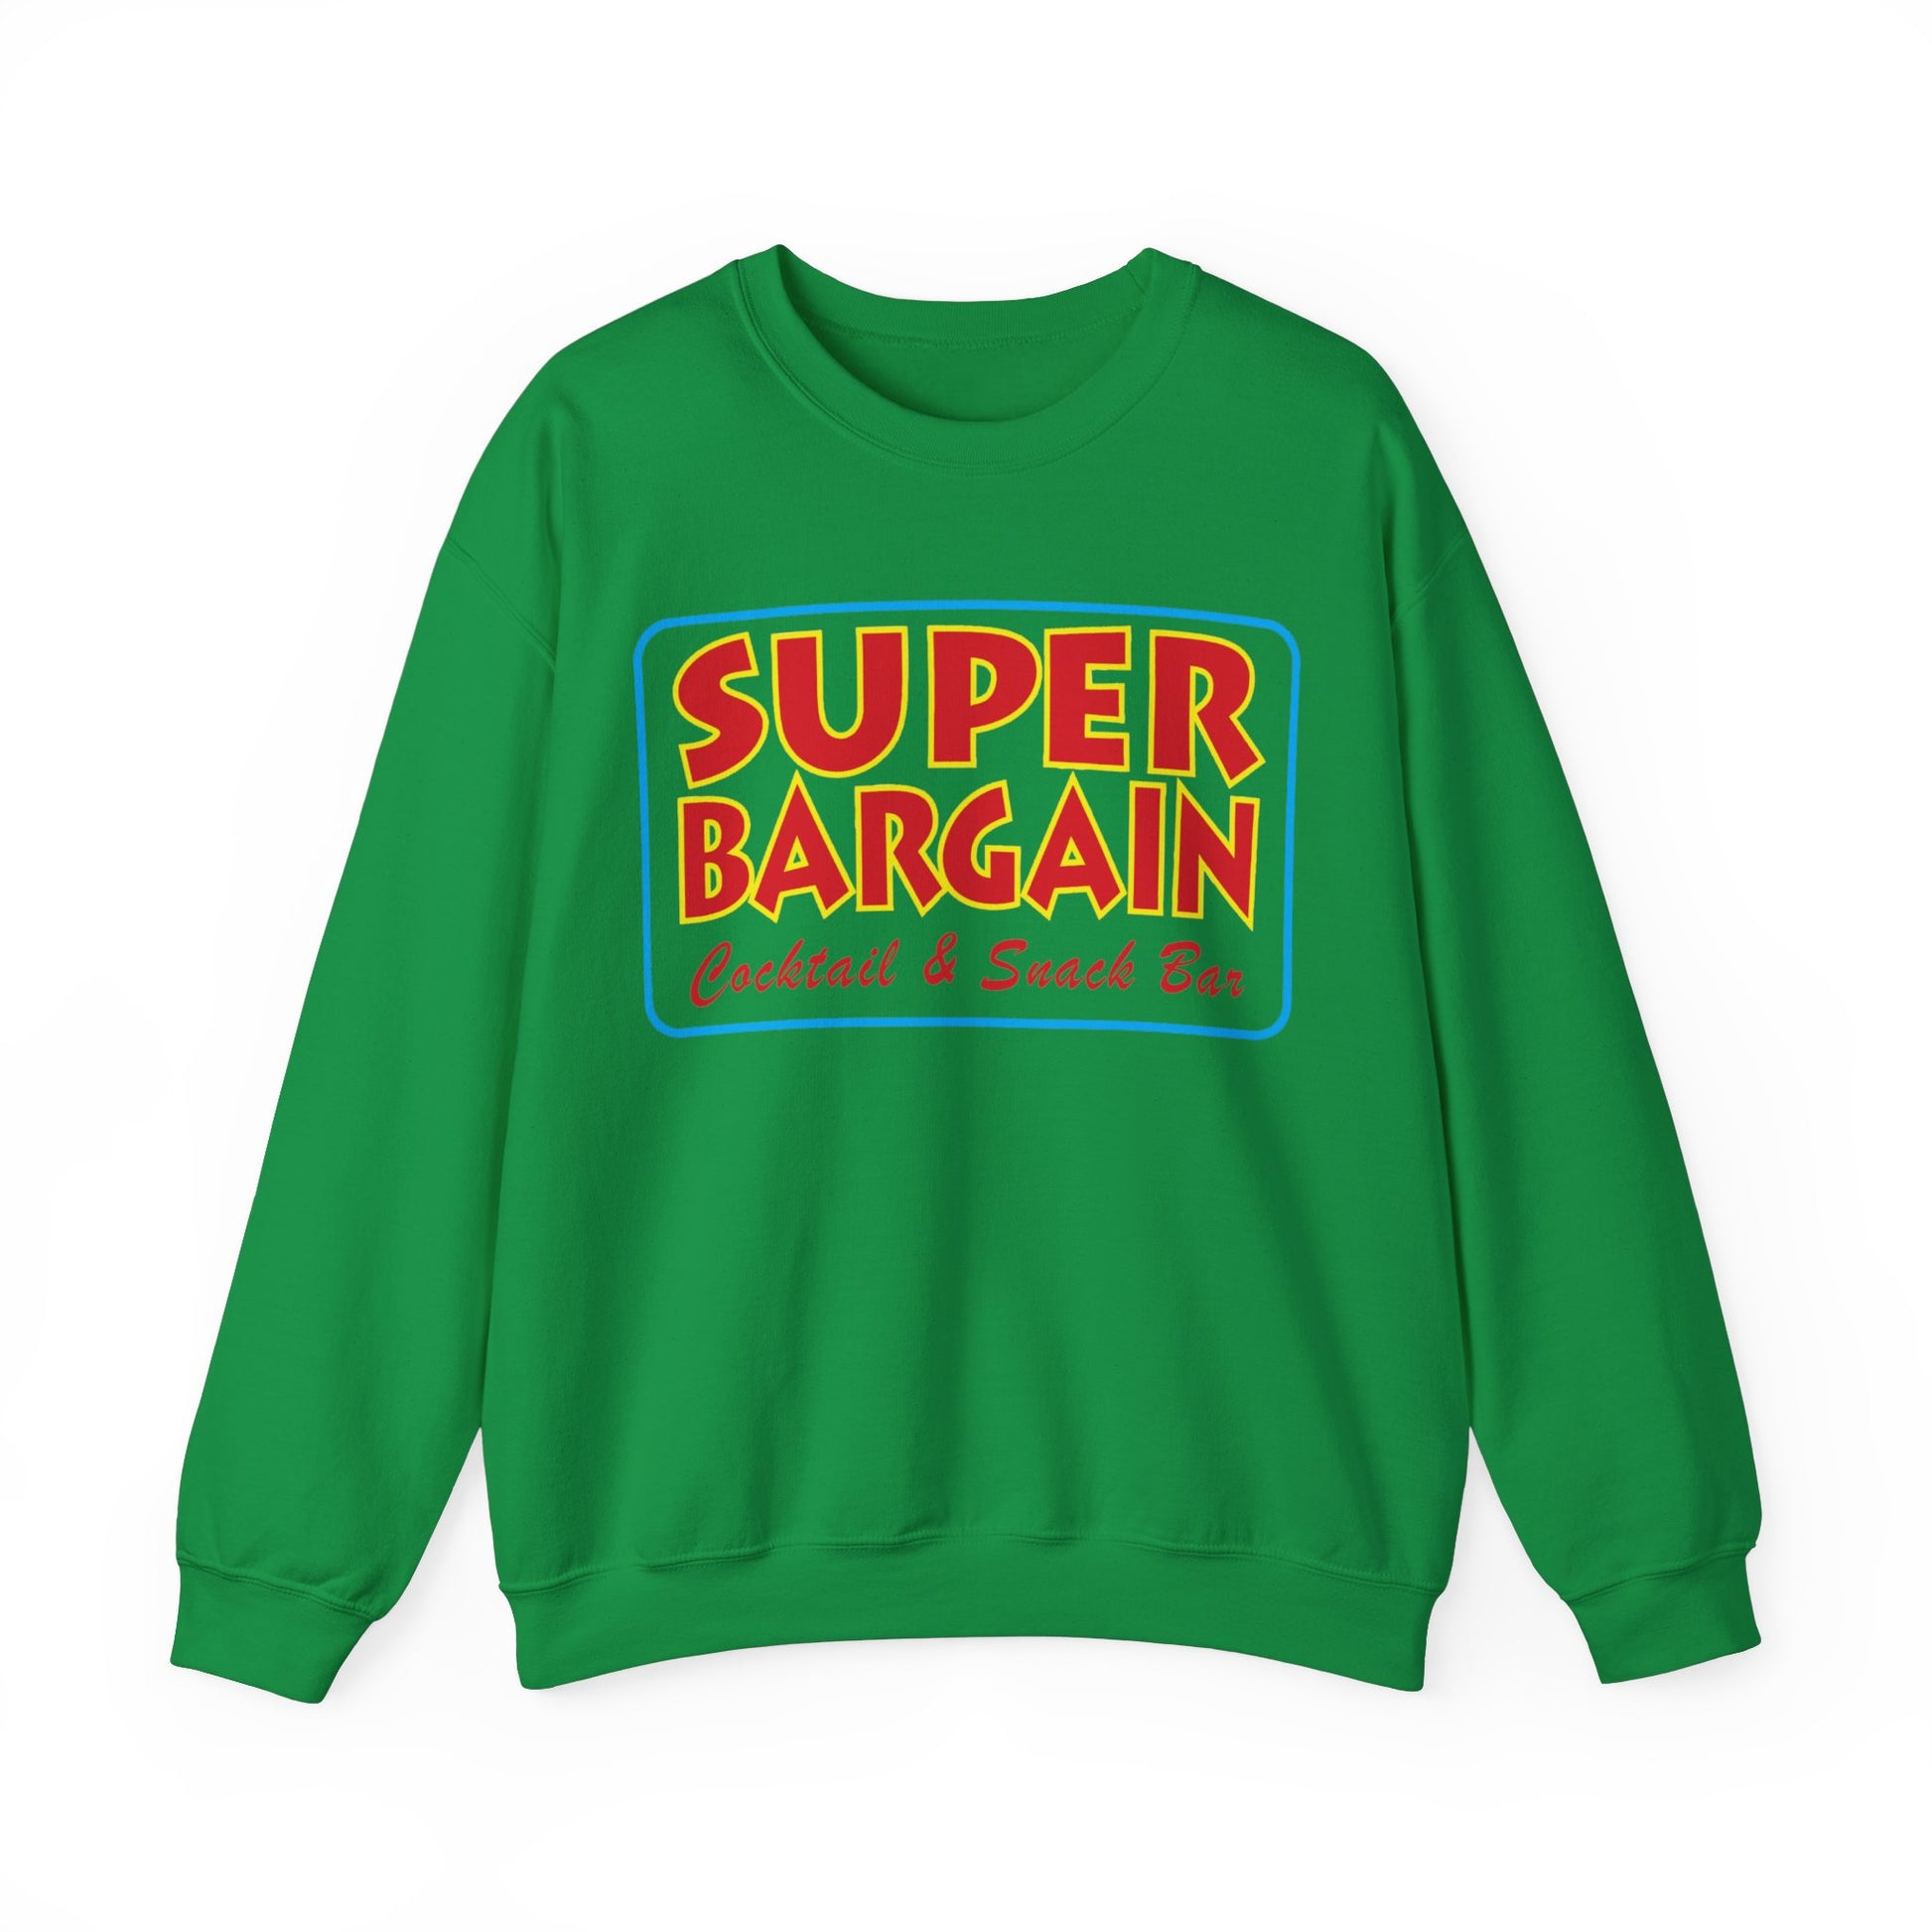 A green Unisex Heavy Blend™ Crewneck Signature Logo sweatshirt with the phrase "SUPER BARGAIN Toronto Orchard & Seeds Inc." in yellow and red text on the front by Printify.